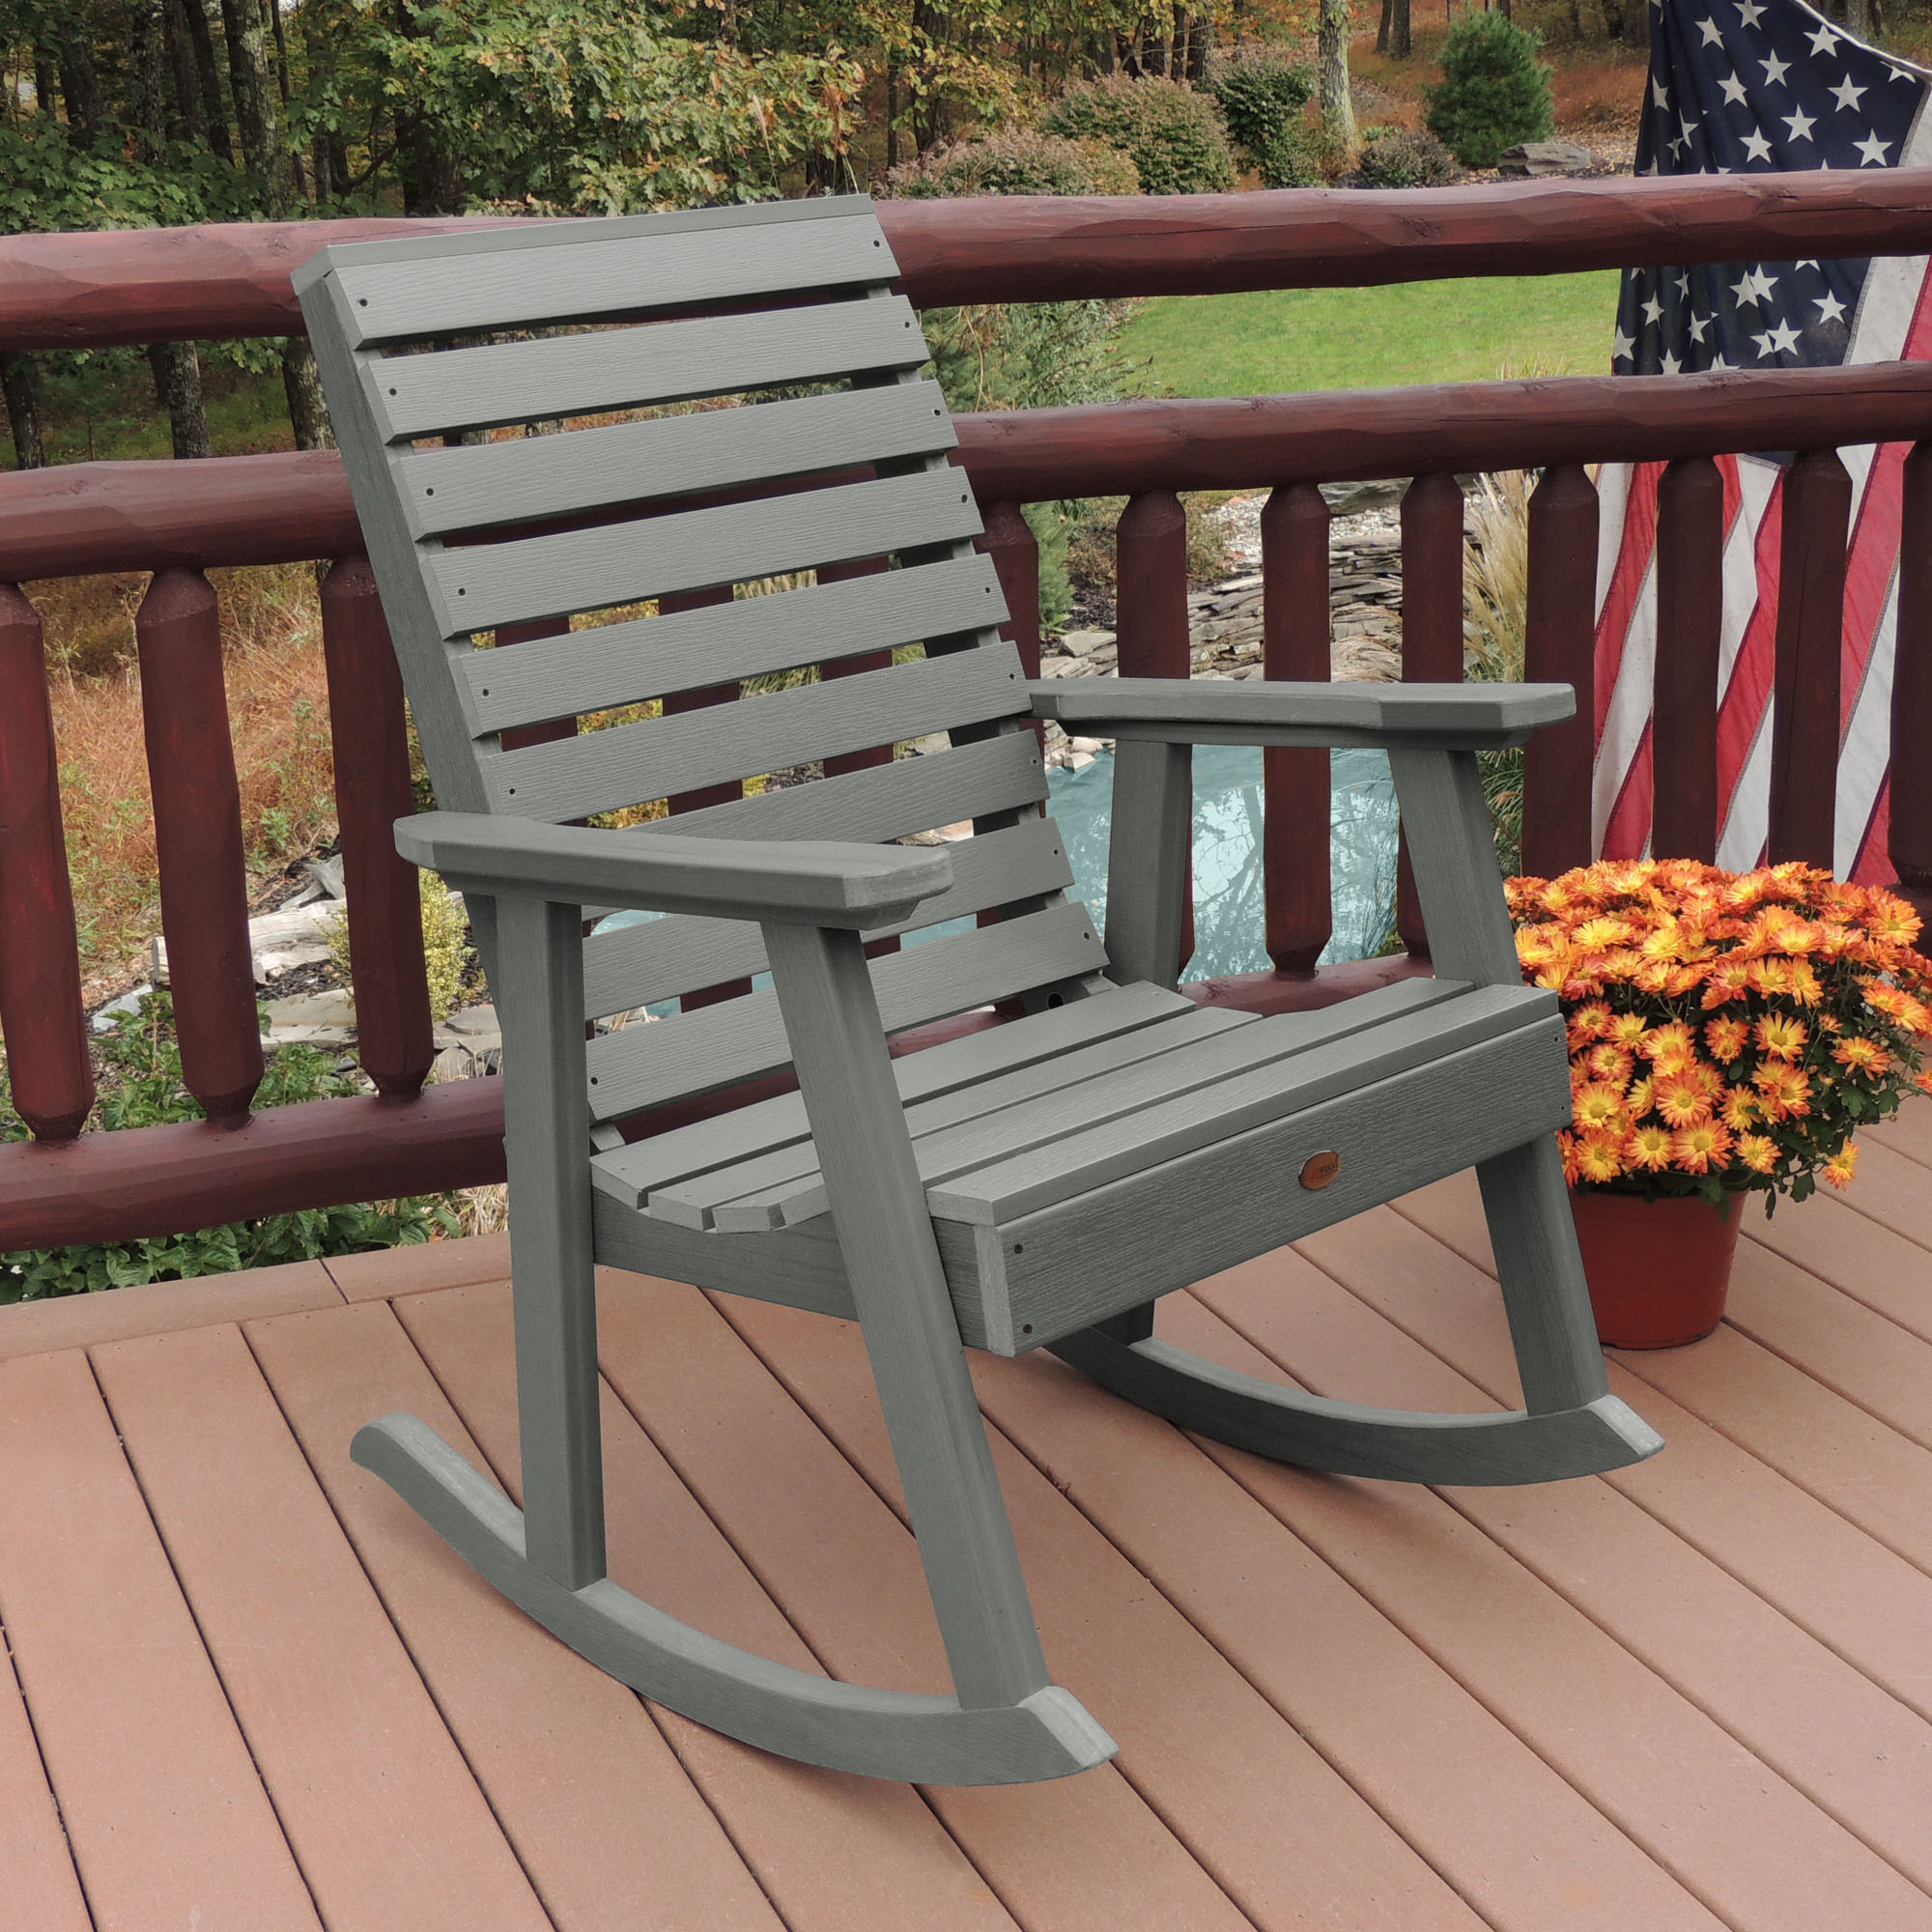 Weatherly Rocking Chair - image 2 of 2